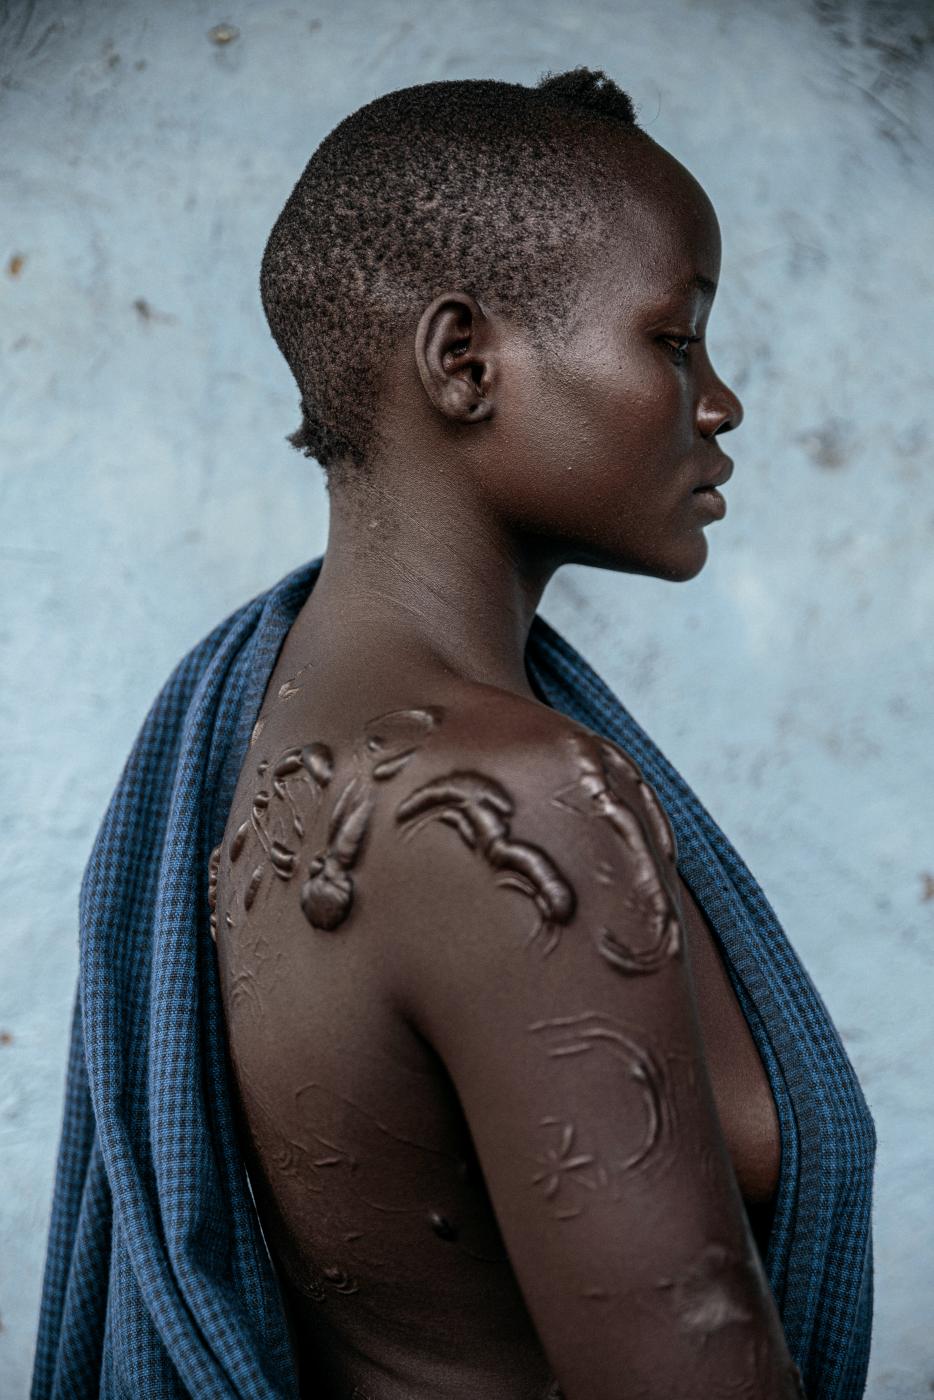 The language of scarifications: A photo essay on the Me'en tribal woman in Ethiopia